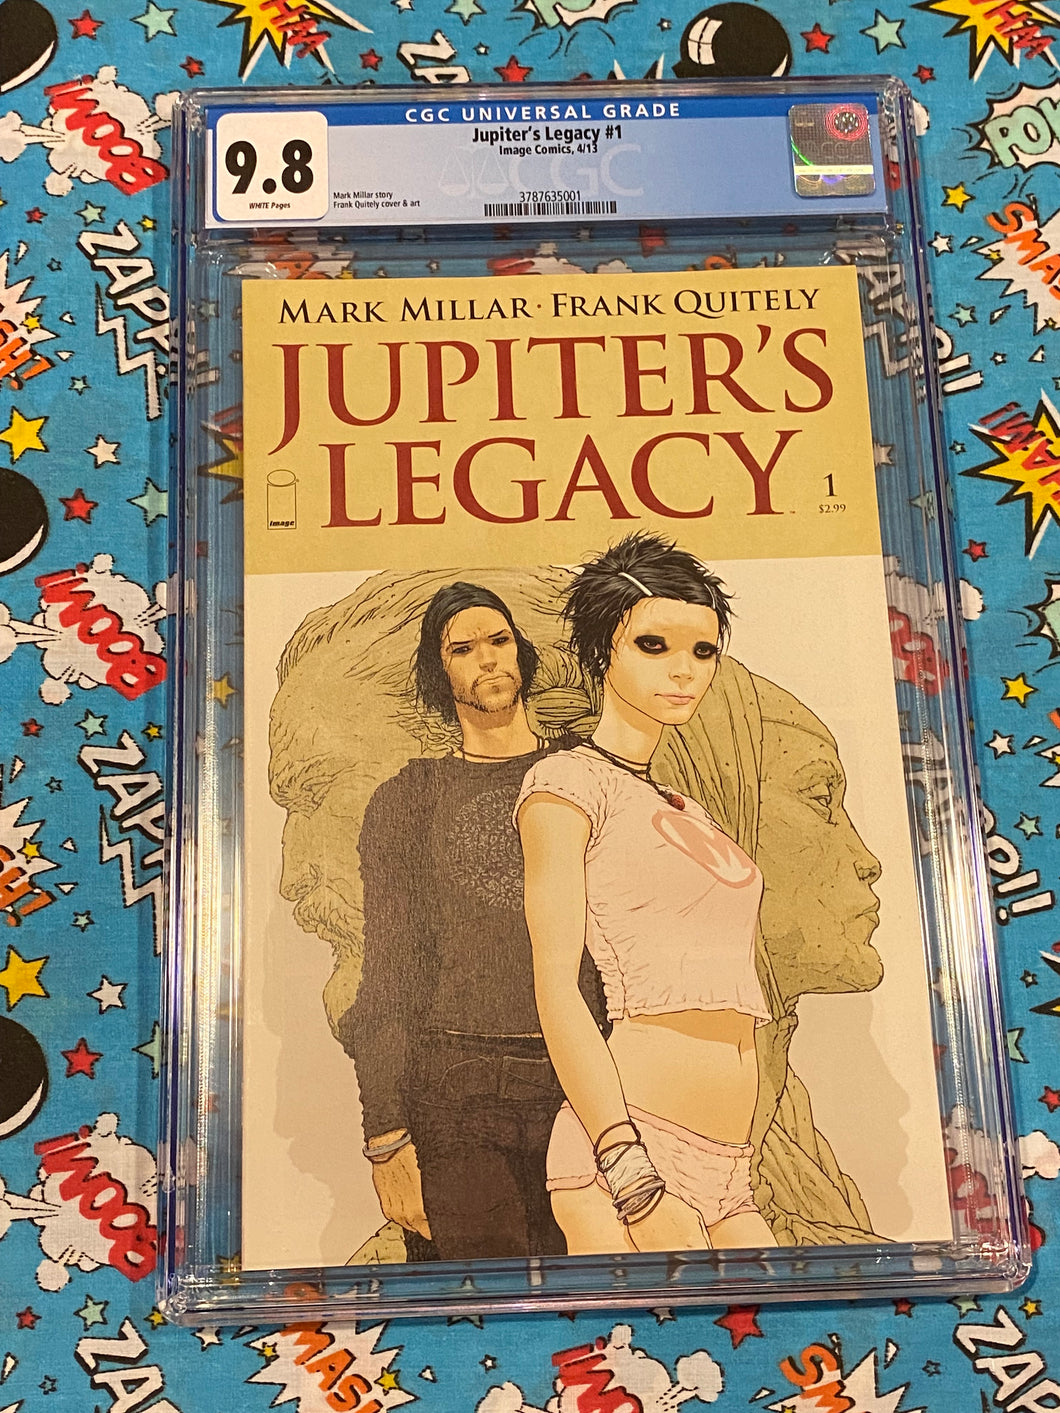 Jupiter's Legacy #1 Frank Quitely cover and art CGC 9.8 - now a netflix tv series